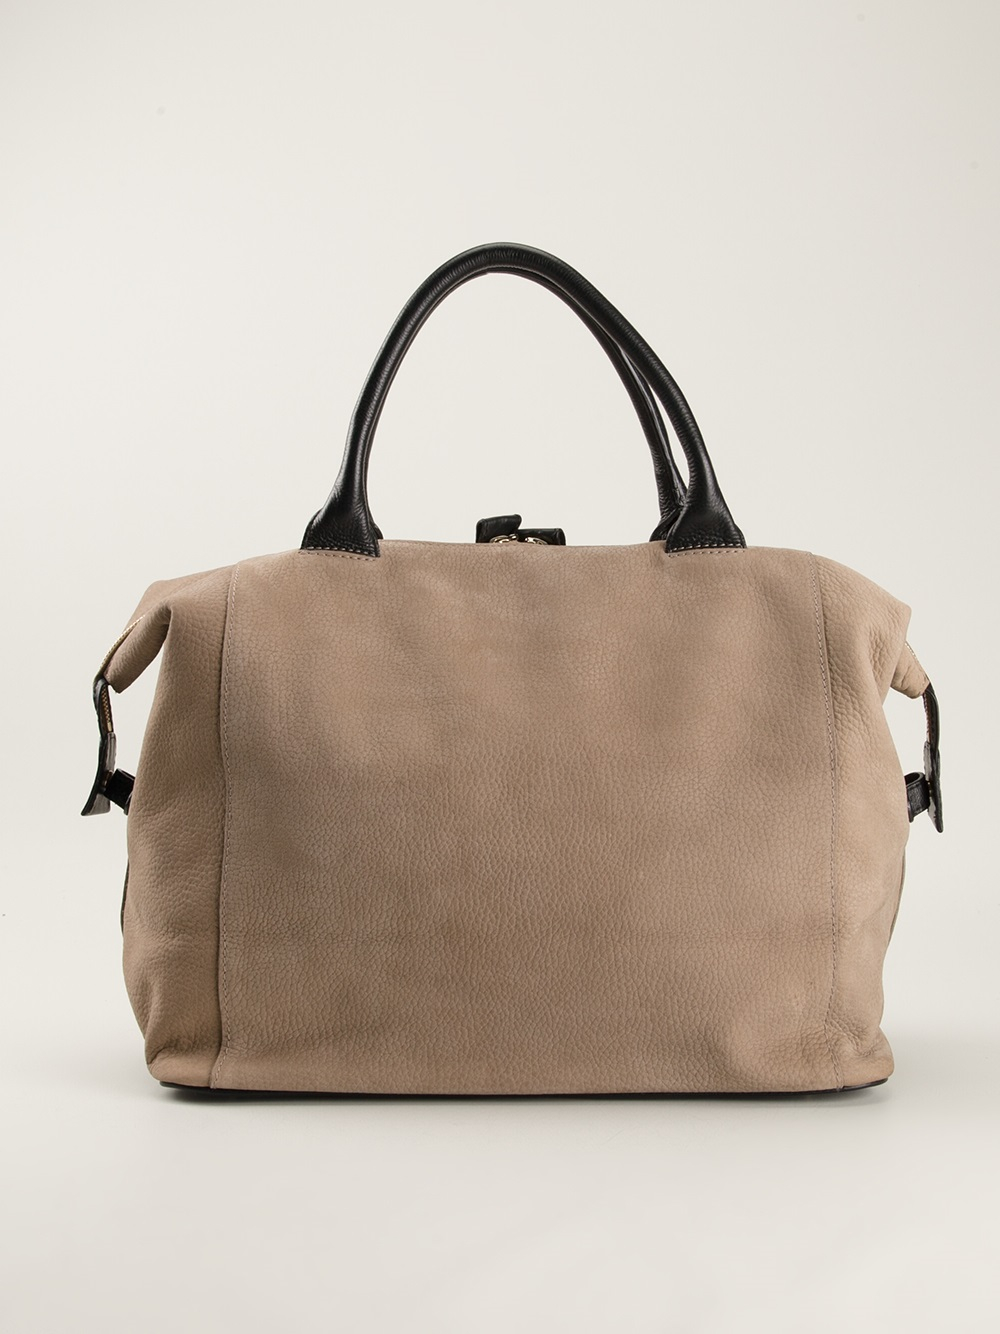 Lyst - See By Chloé 24 Hour Tote in Natural